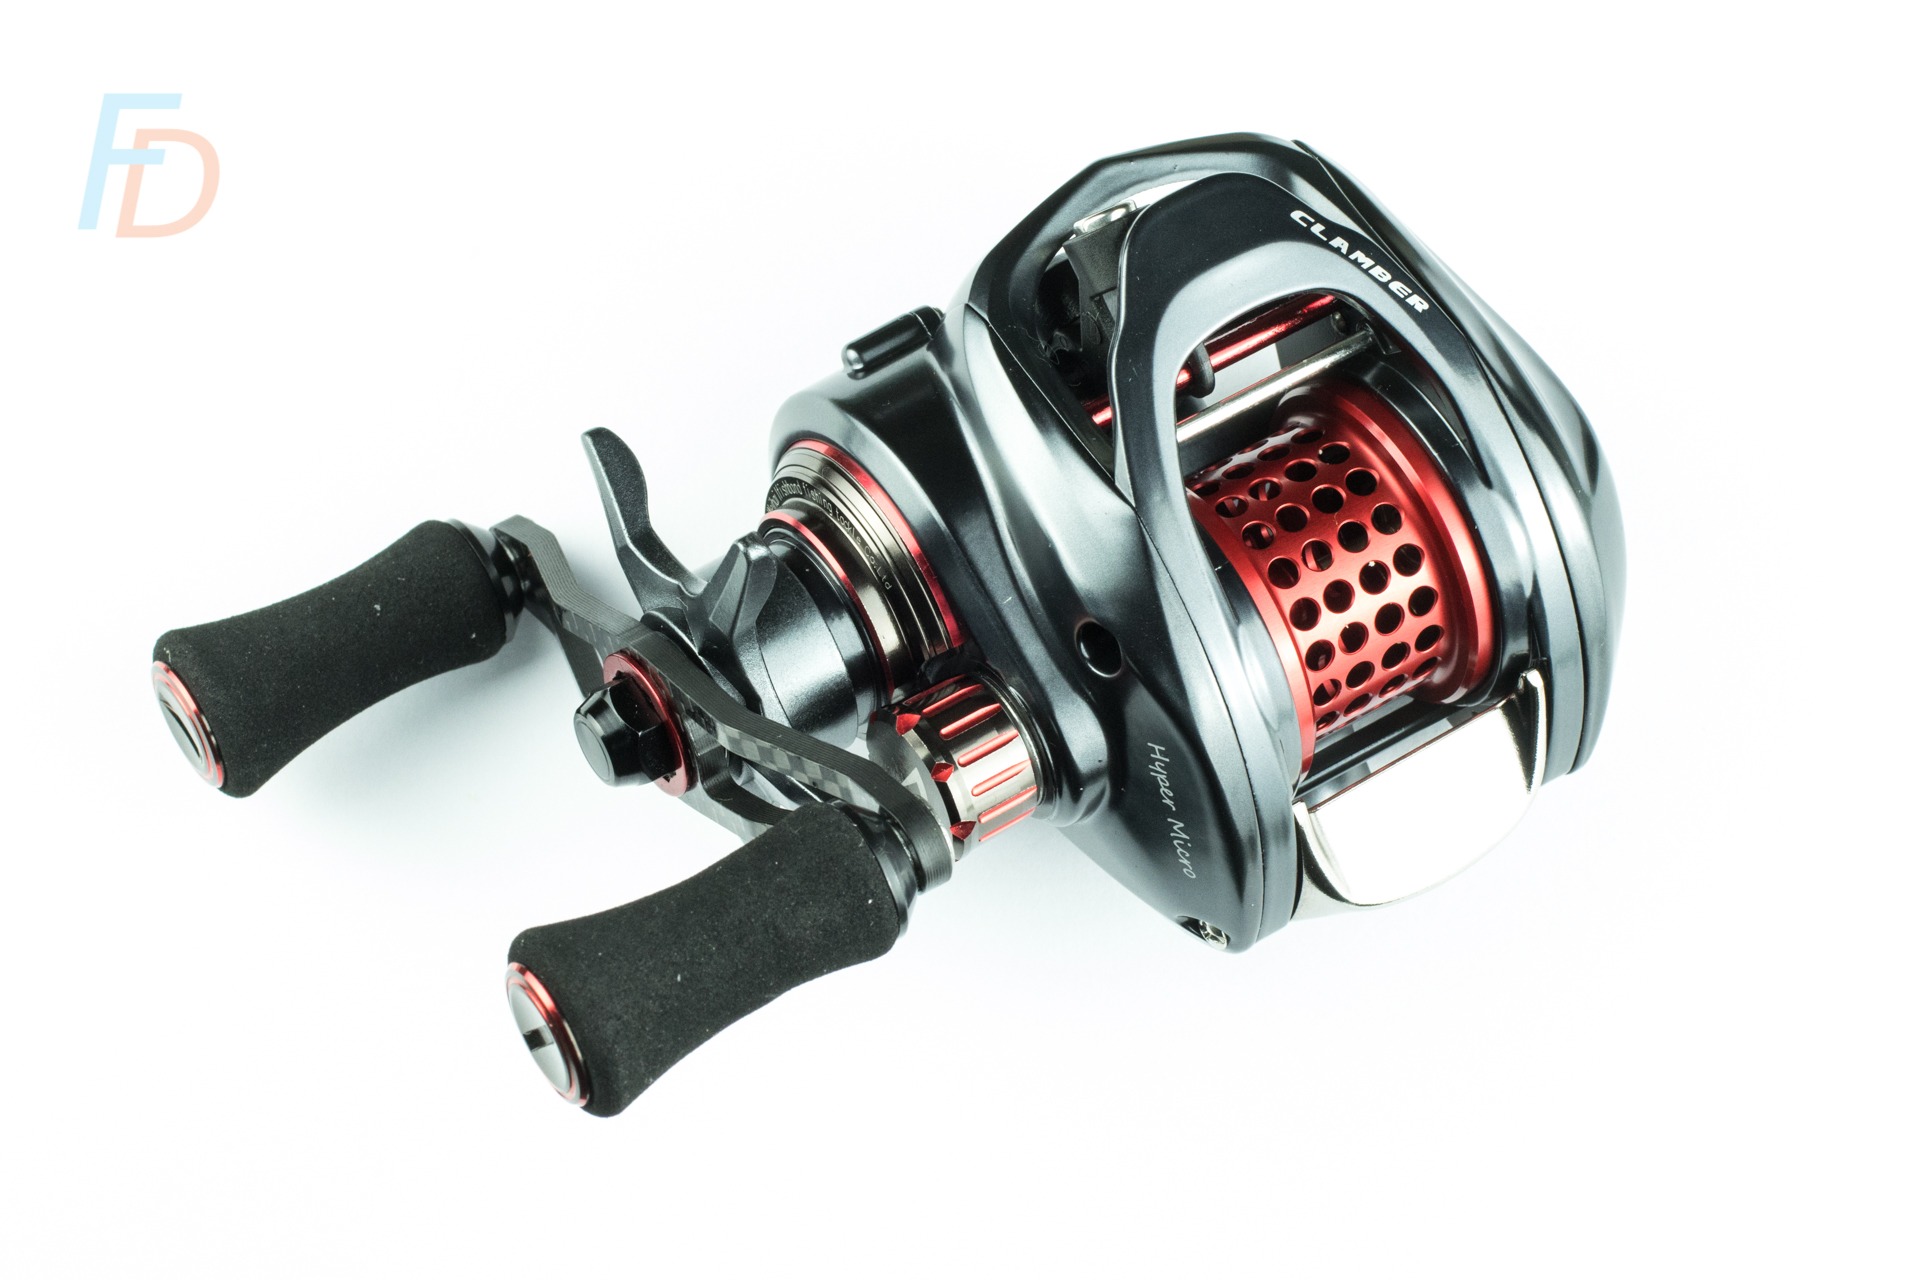 Fishband Clamber Hyper Micro CR-HM06 complete reel with upgraded roro bearings